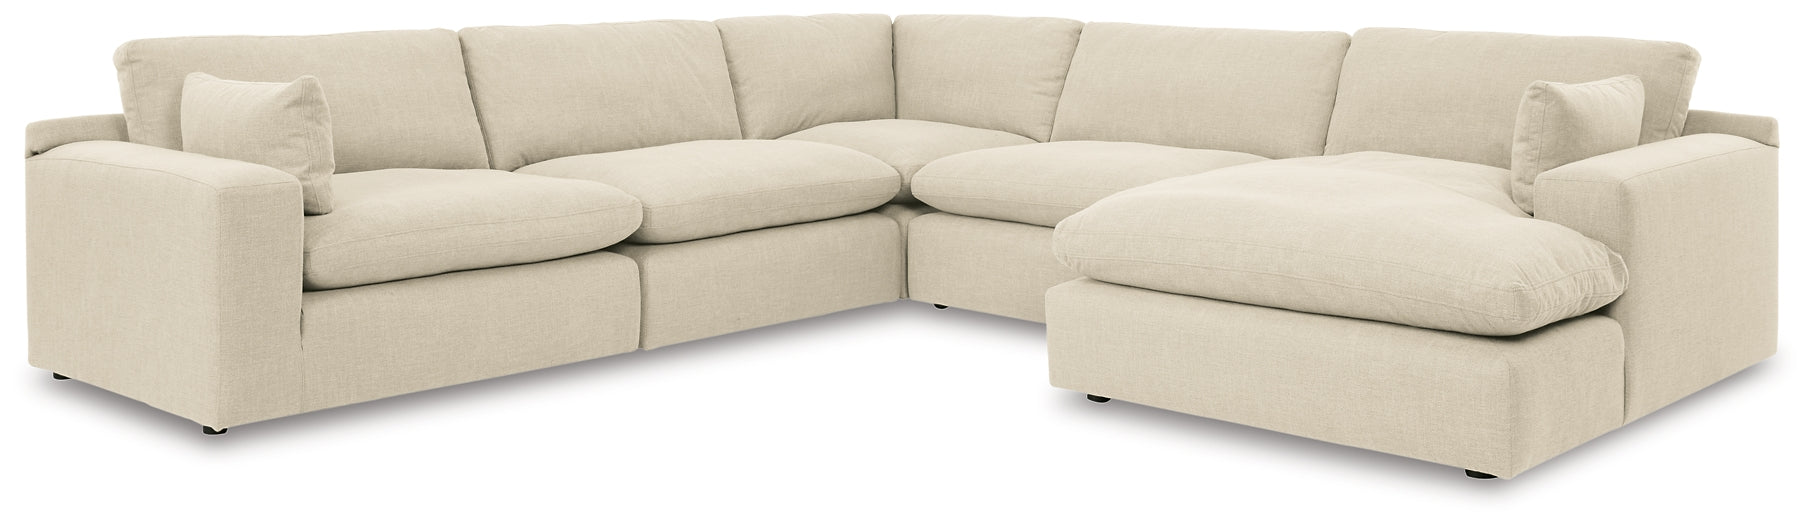 Elyza 5-Piece Sectional with Chaise JR Furniture Store